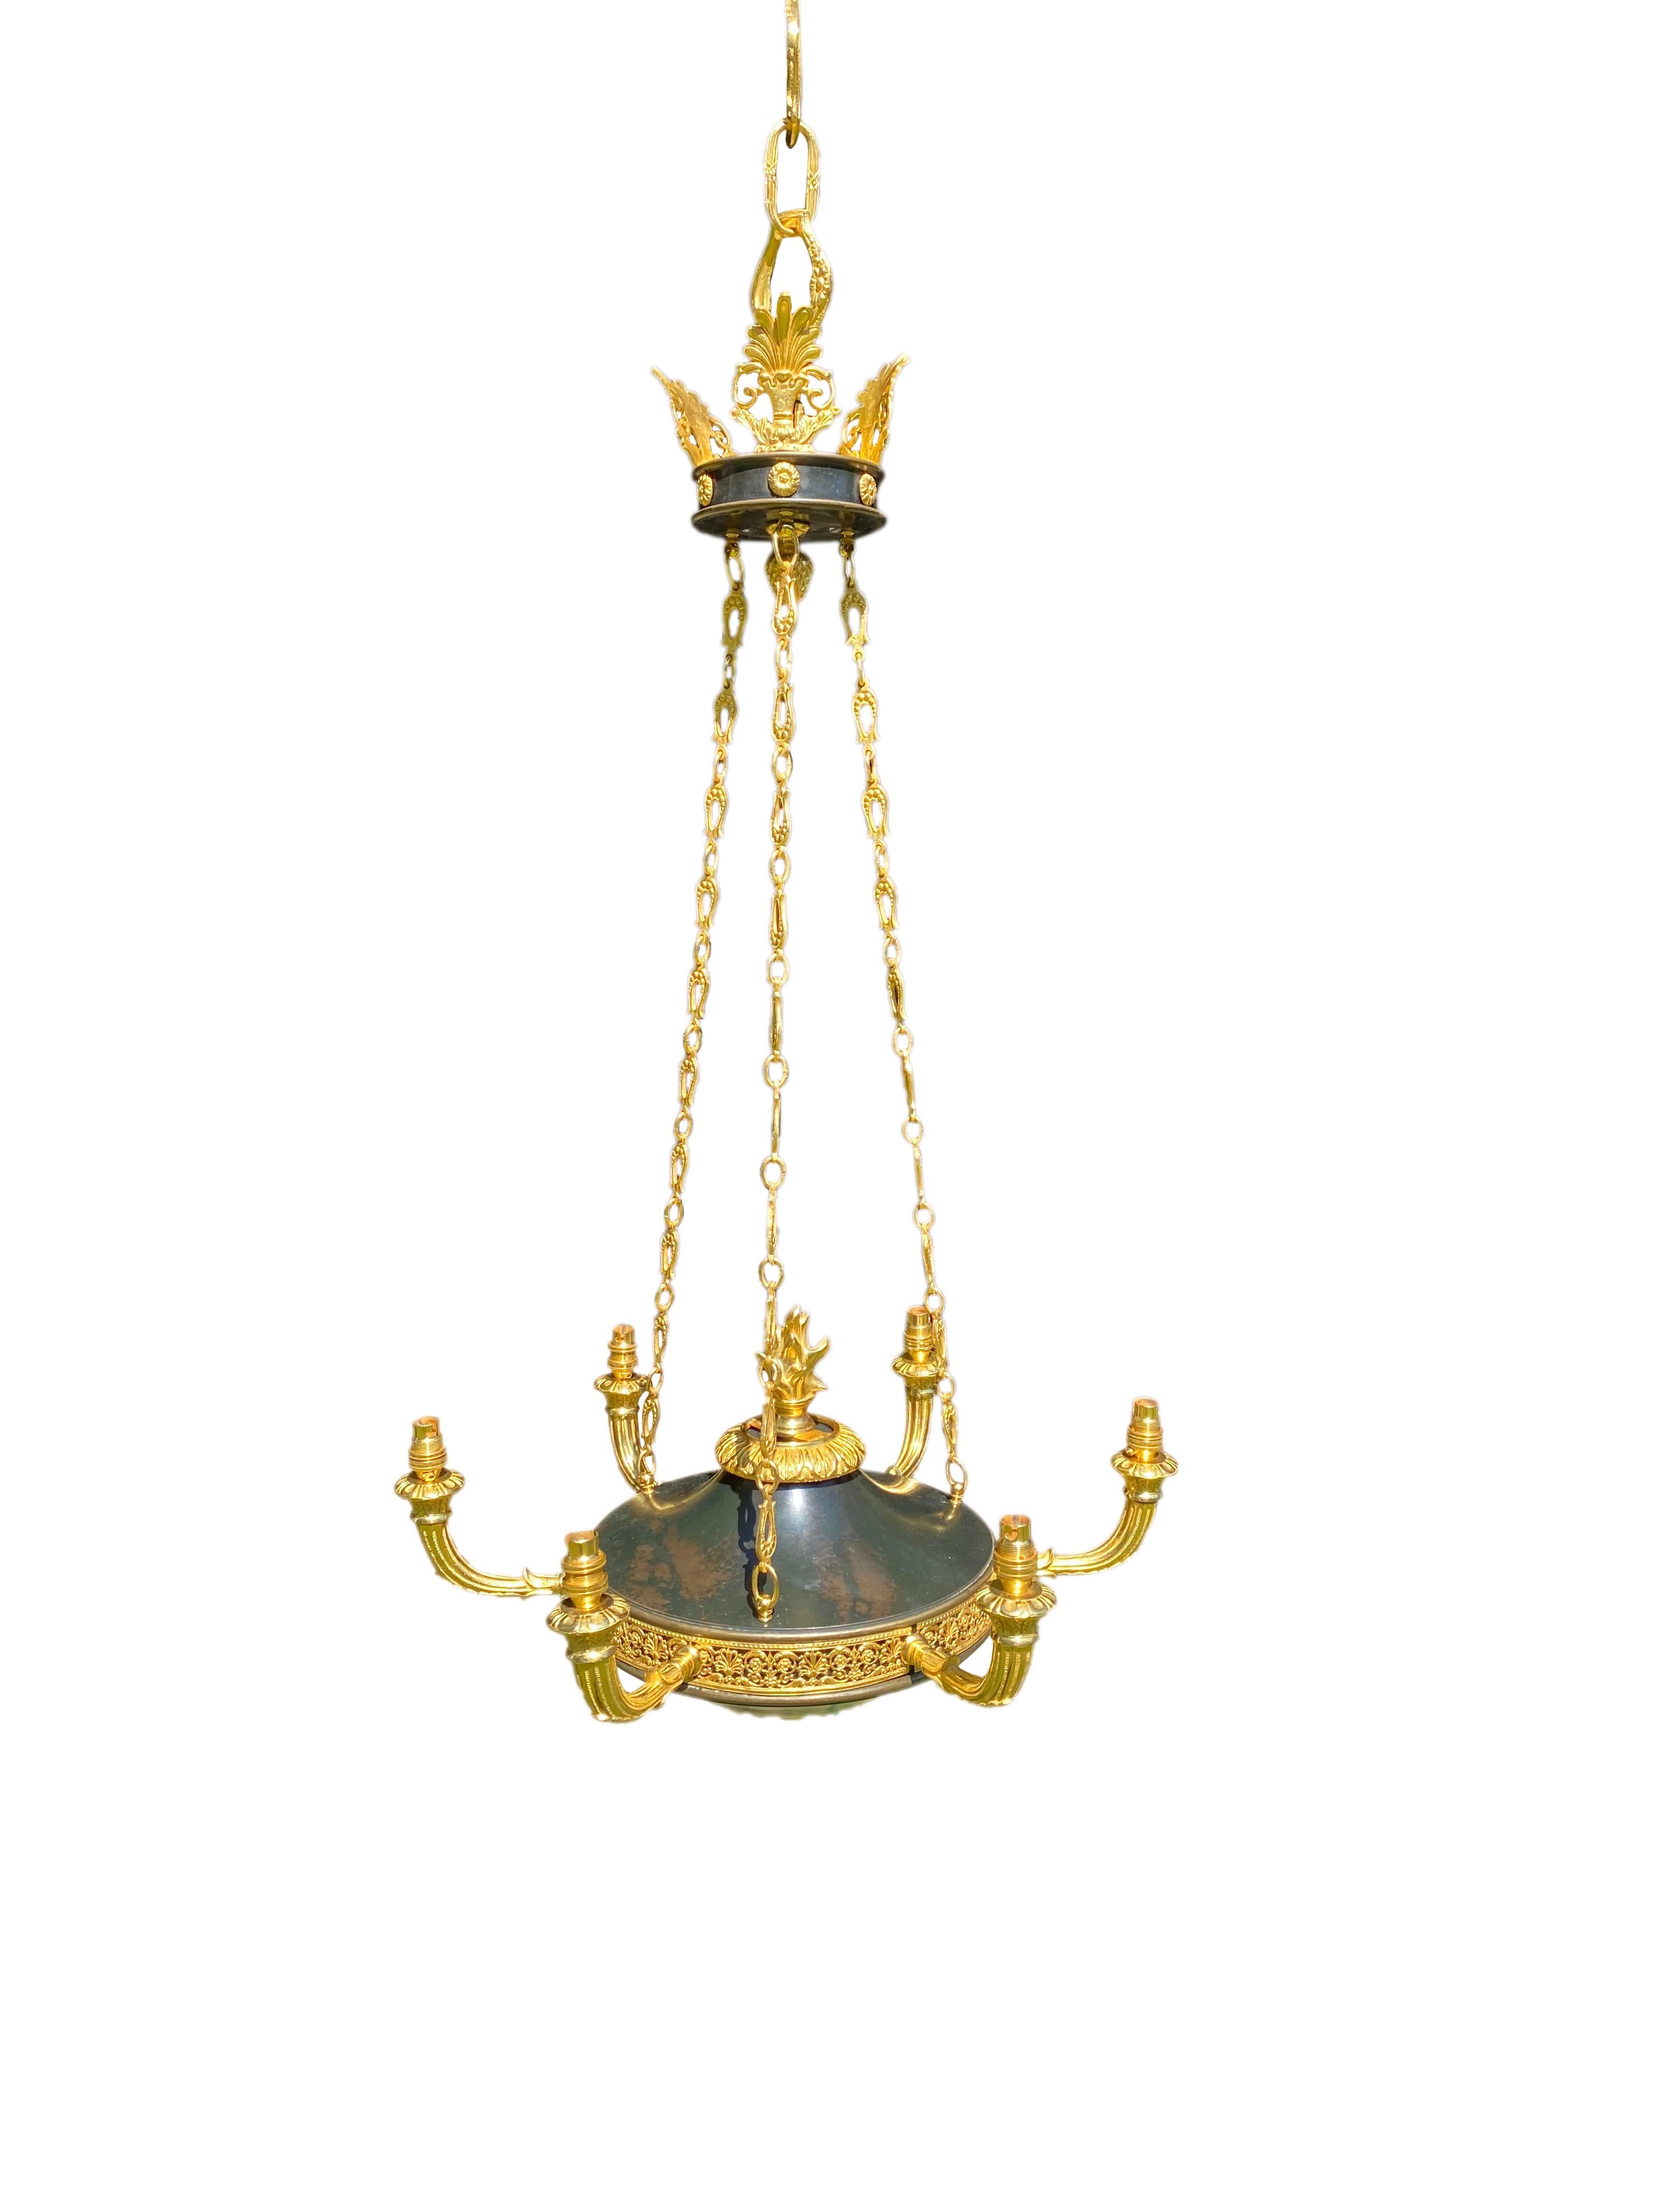 19th Century French Empire Chandelier For Sale 12